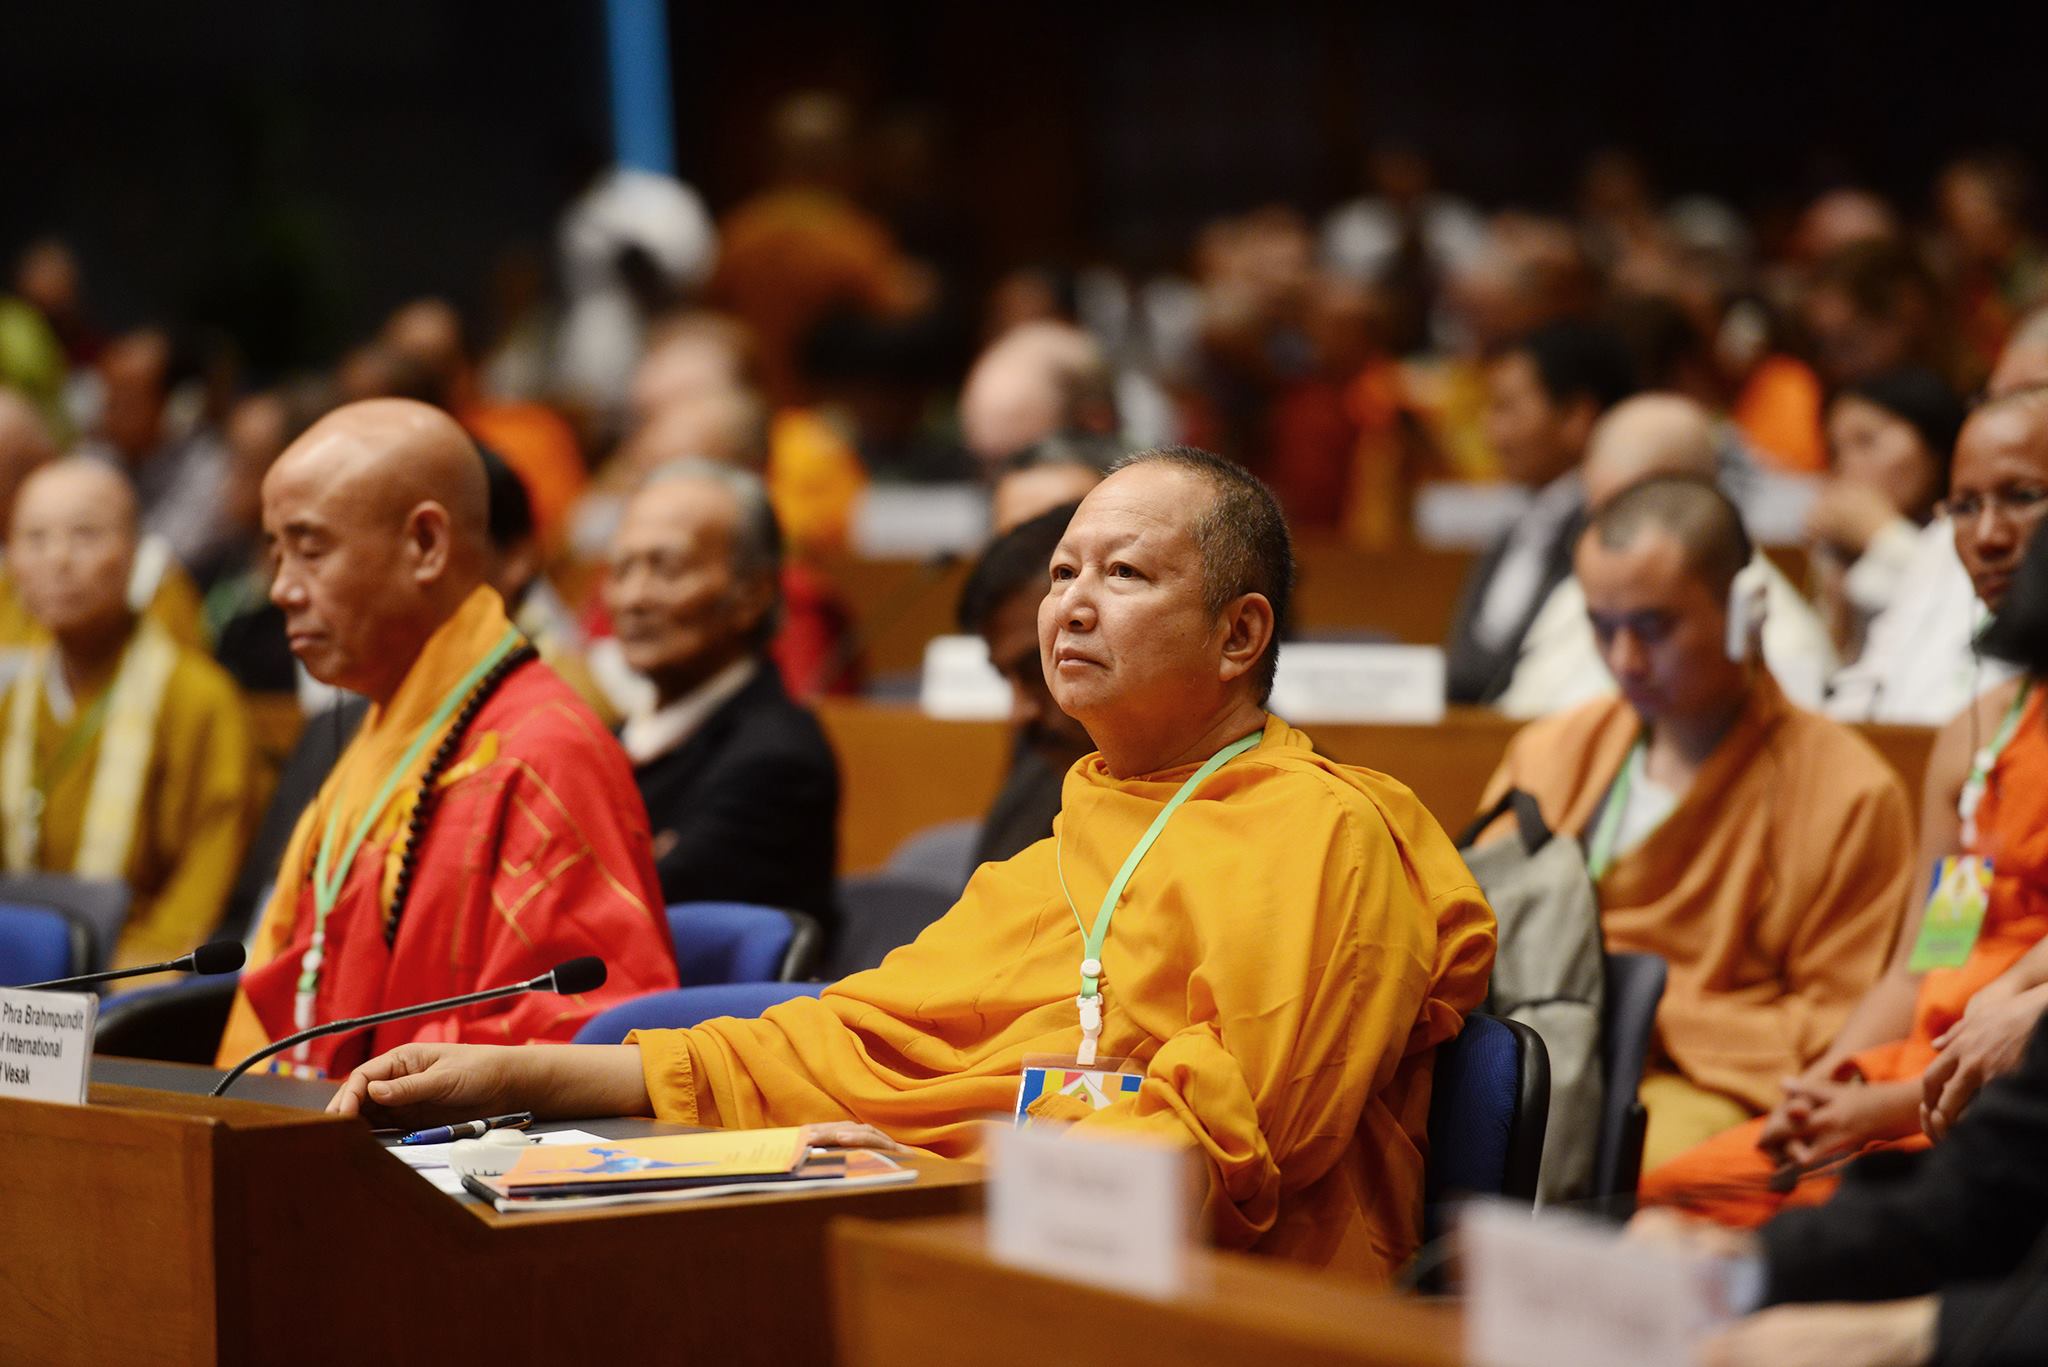 Announcing of the 2015 Bangkok Declaration followed by chanting for world peace